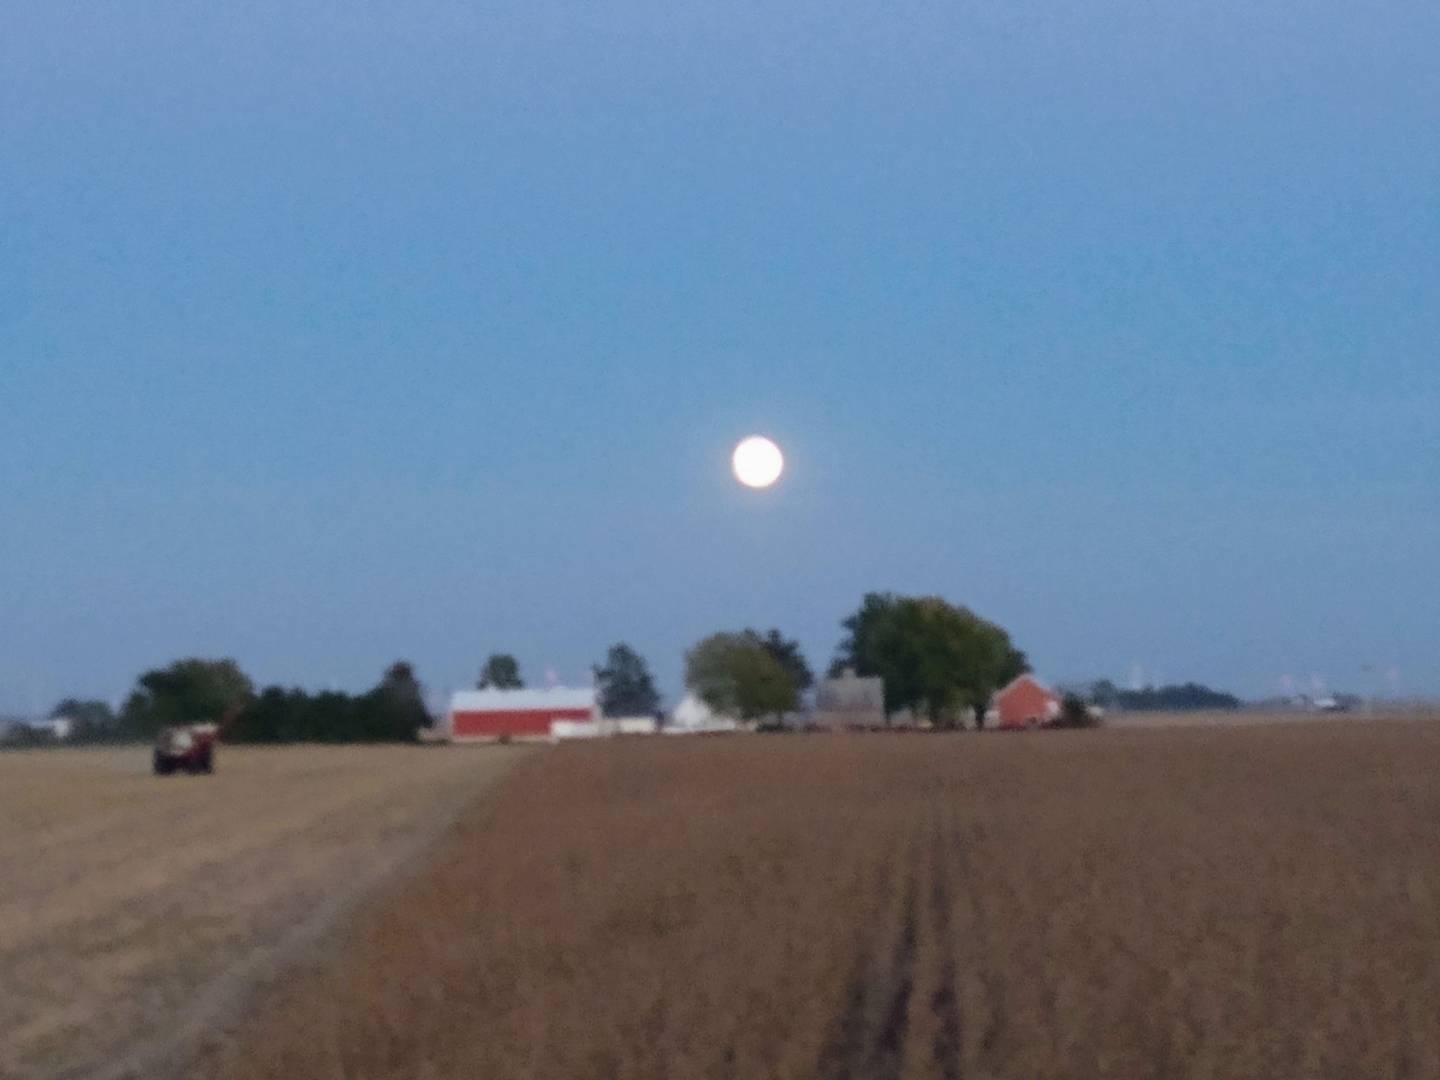 “Moon rising” — J.C. Reitmeier: “Combining beans at sunset with moon coming up in the east over our family farmstead.”